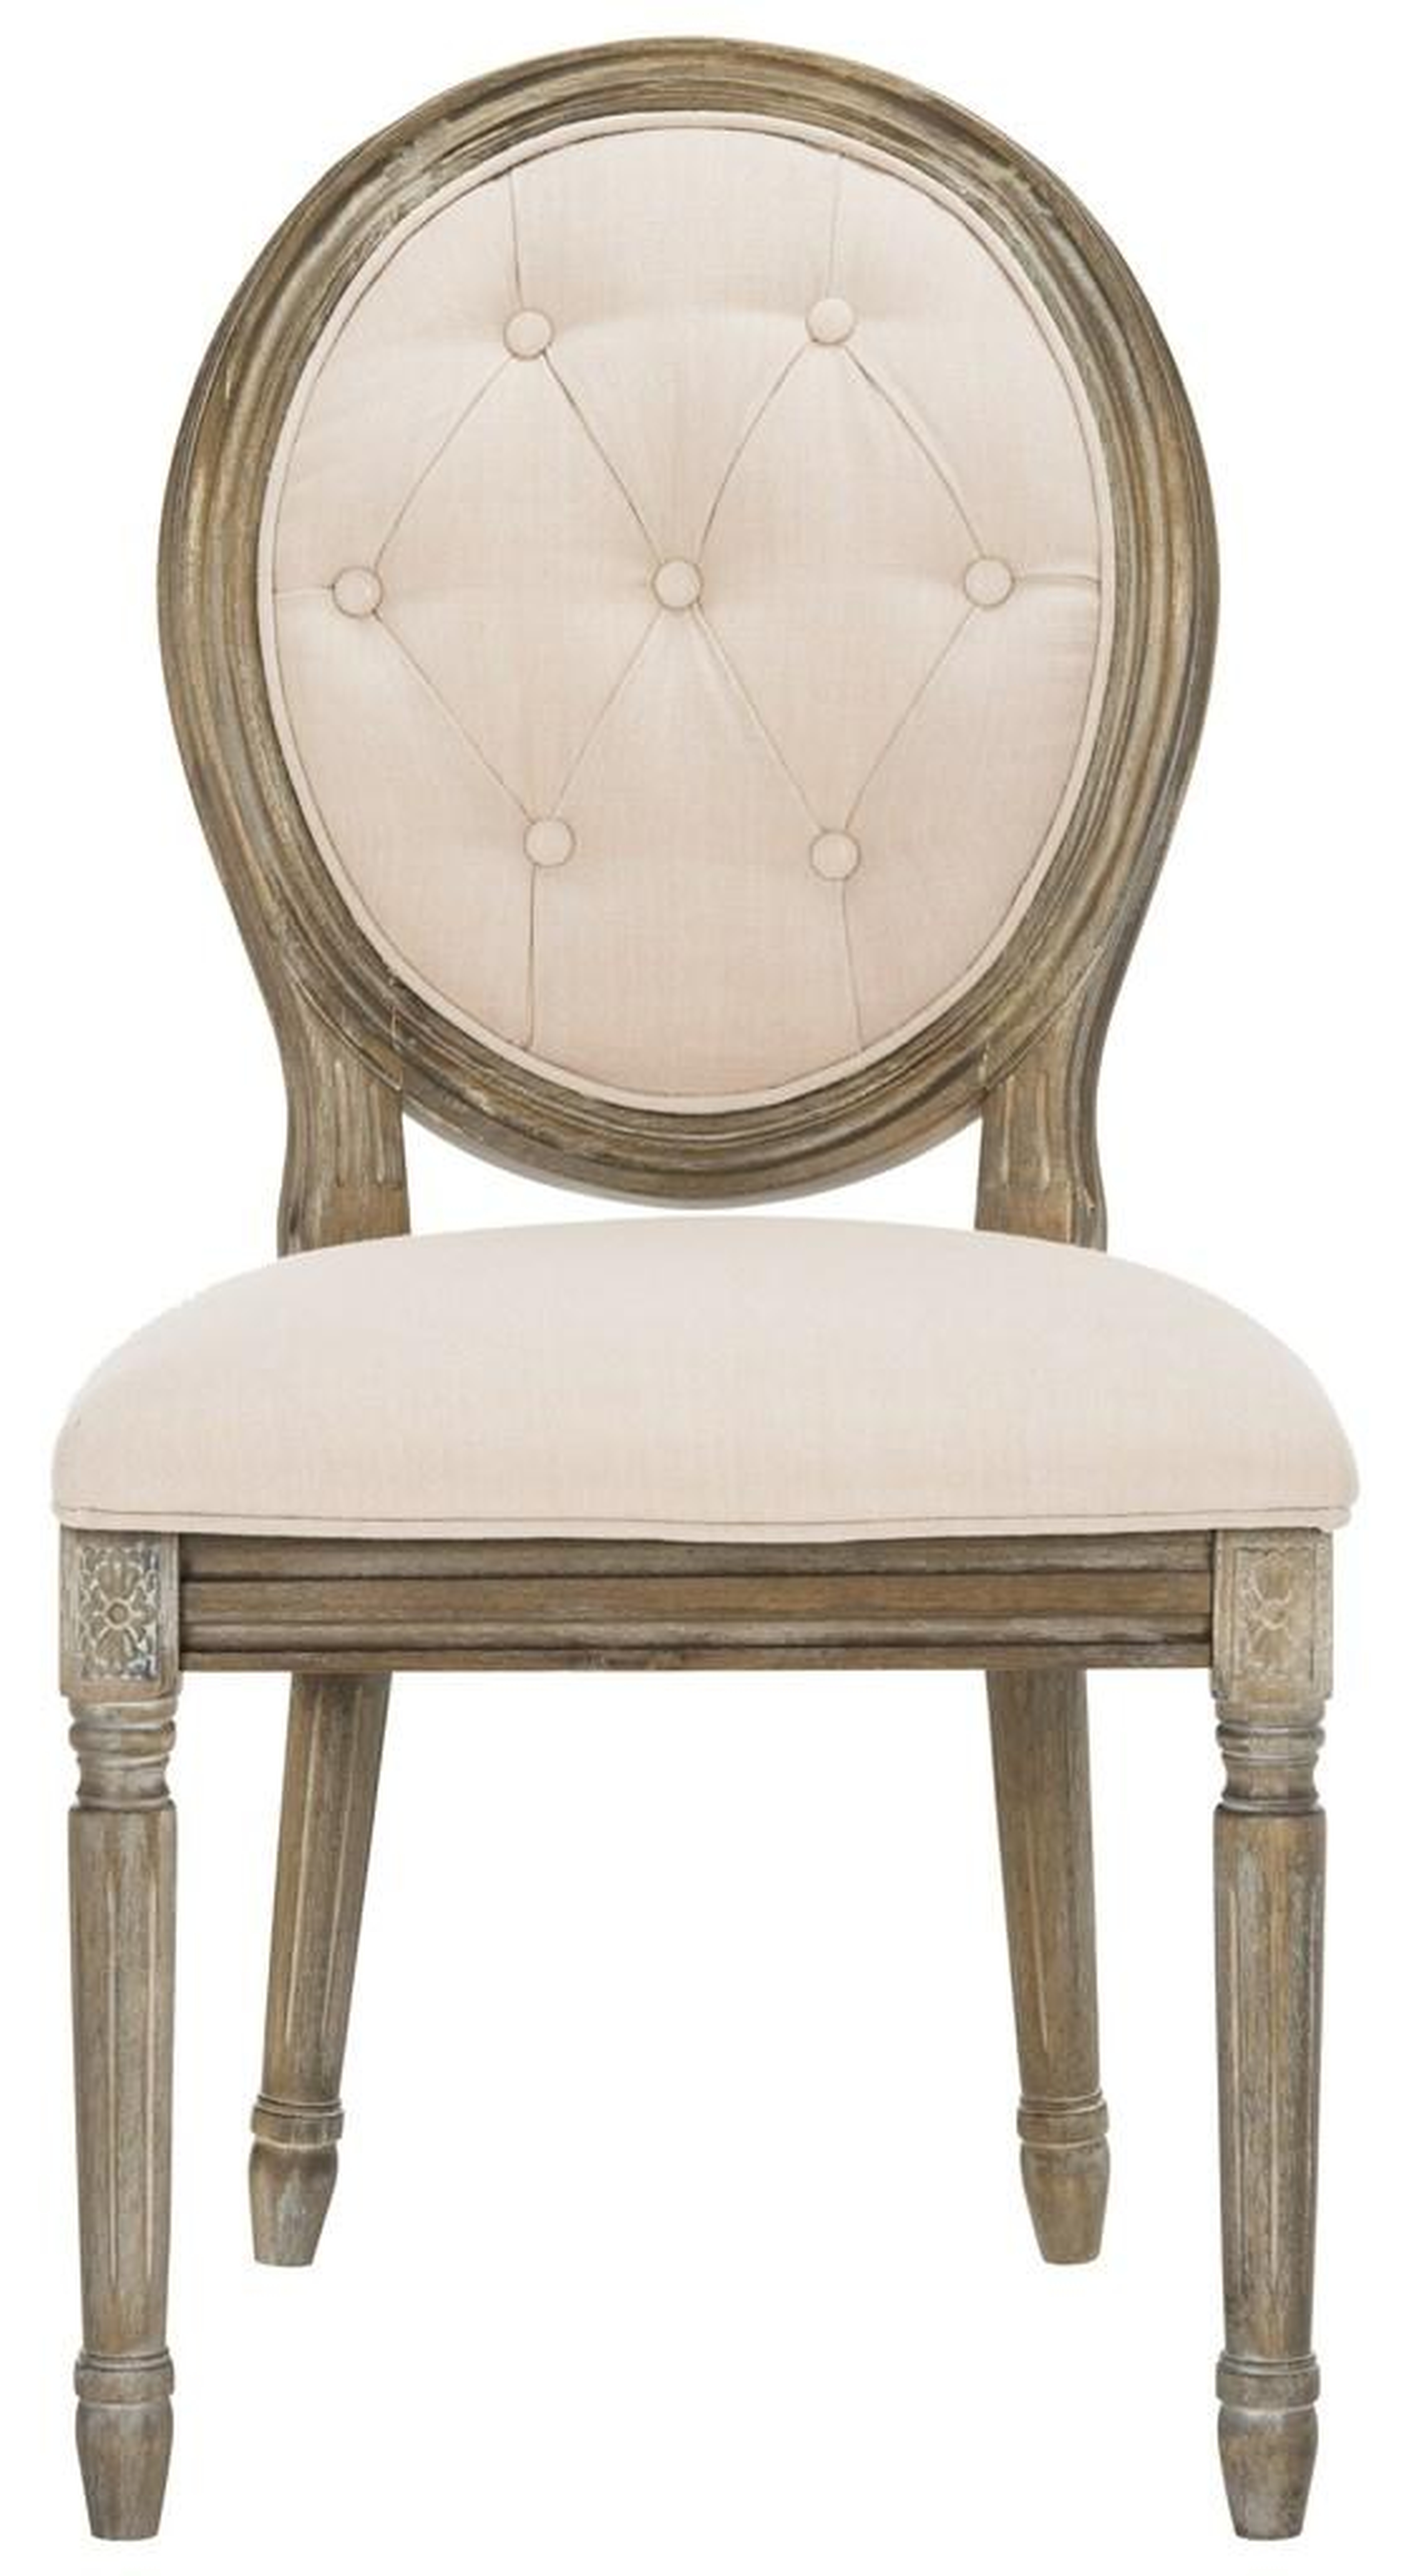 Holloway Tufted Oval Side Chair  - Beige/Rustic Oak - Arlo Home - Arlo Home